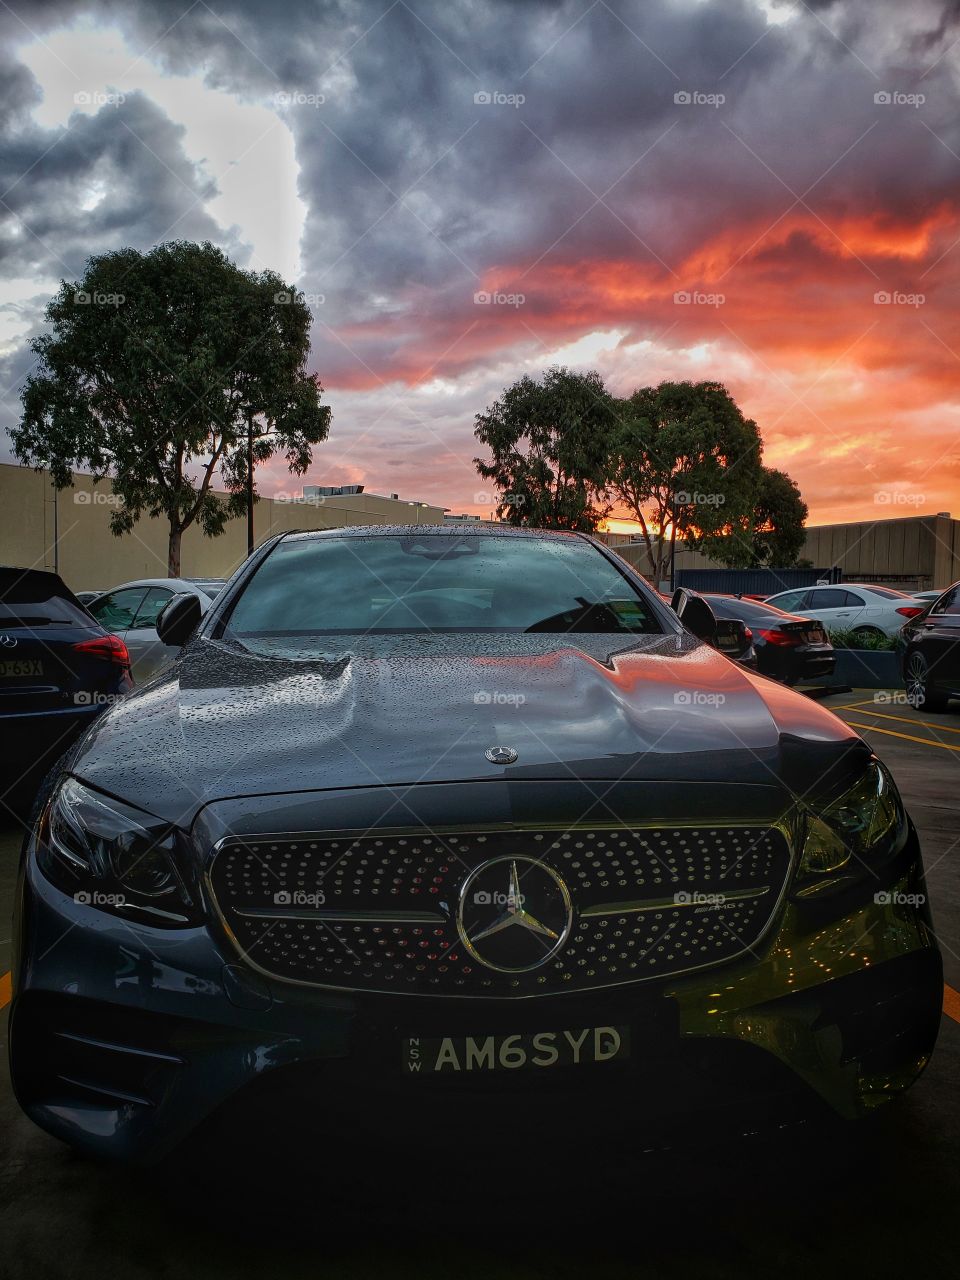 Mercedes Benz car covered with light drizzling of rain. Dramatic and intense cloudscape above.